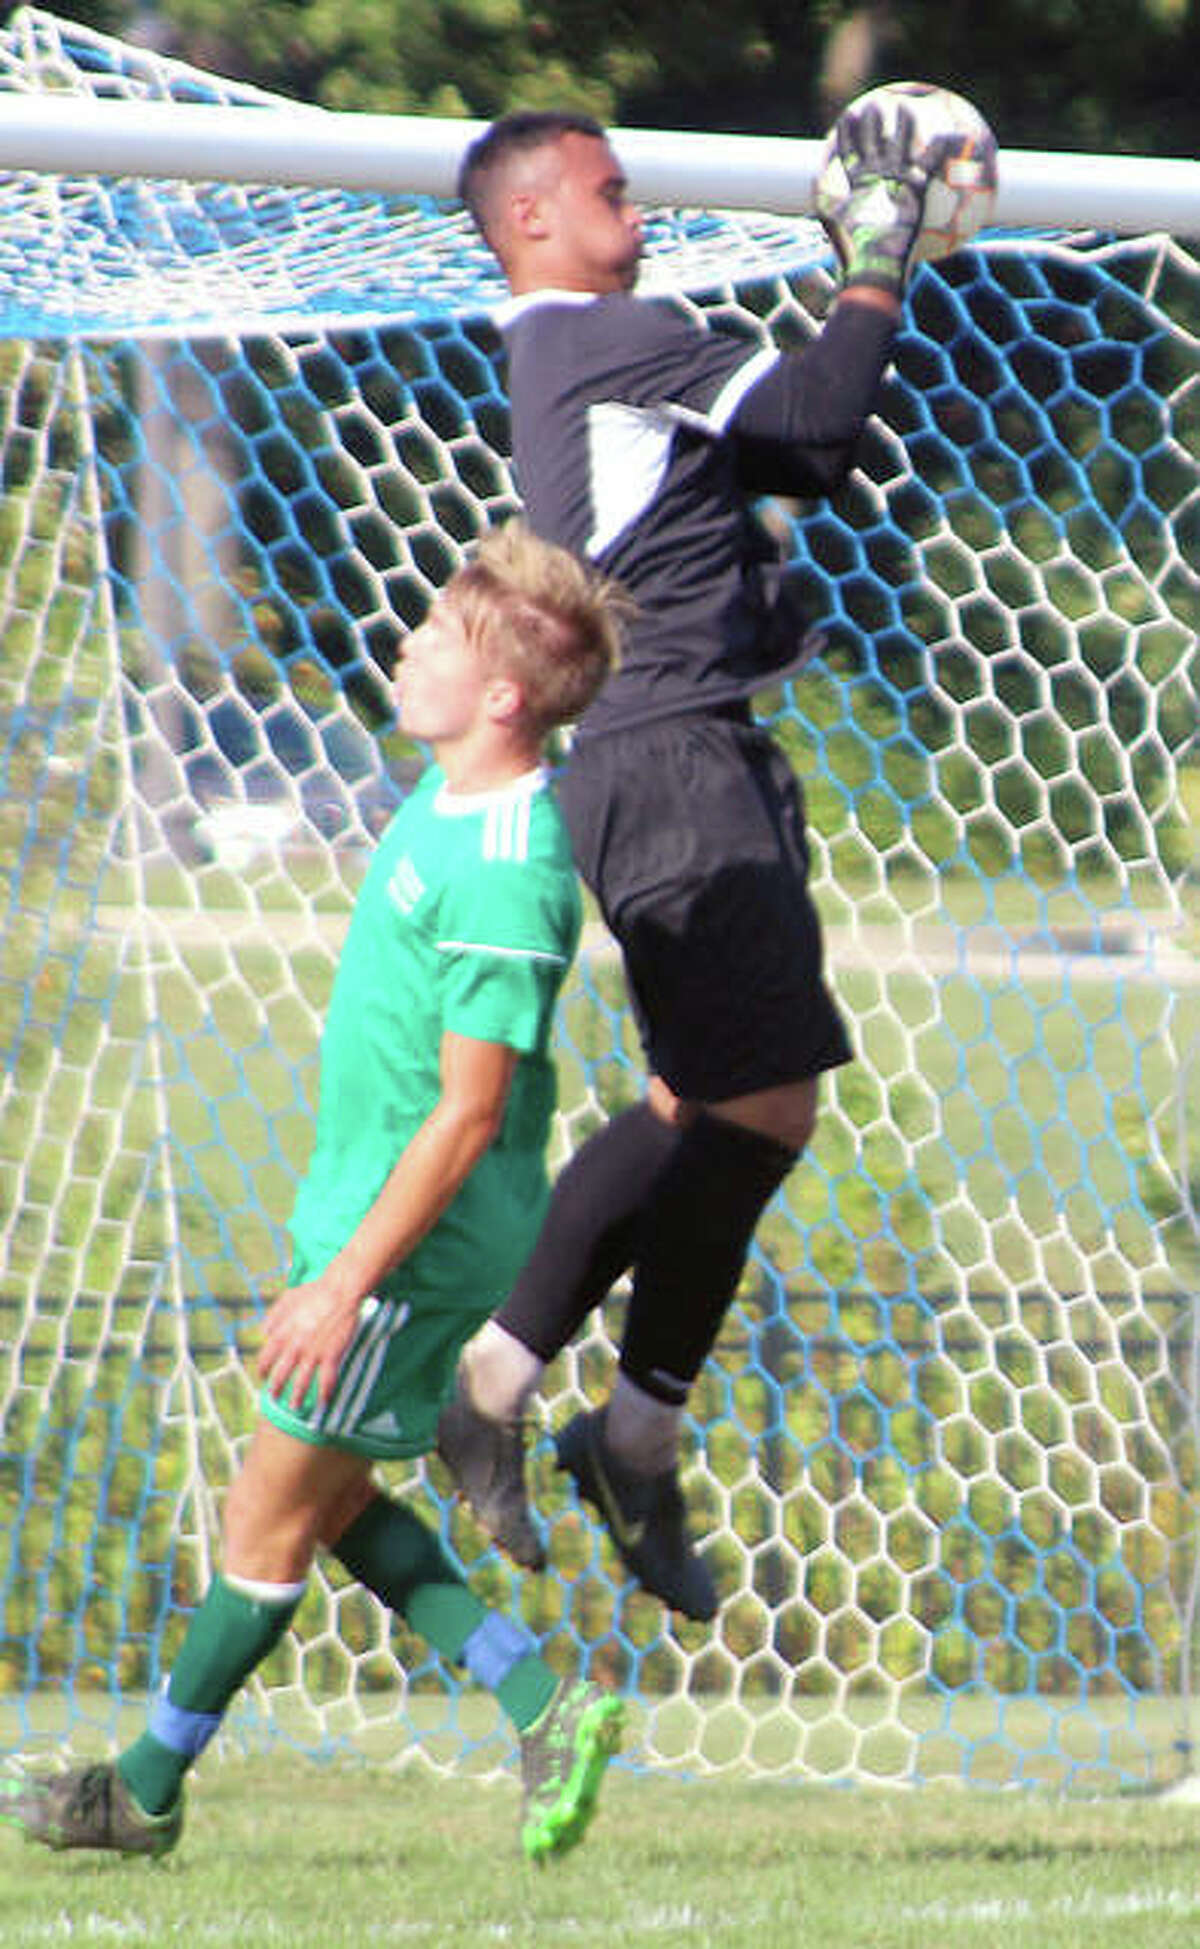 LCCC goalie Christian Deans grabs a a crossing pass intended for Jan Luca Behnke of John Wood College during Wednesday’s game at LCCC’s Tim Rooney Stadium. Deans made seven saves and helped the No. 20-ranked Trailblazers notch their second shutout of the season.